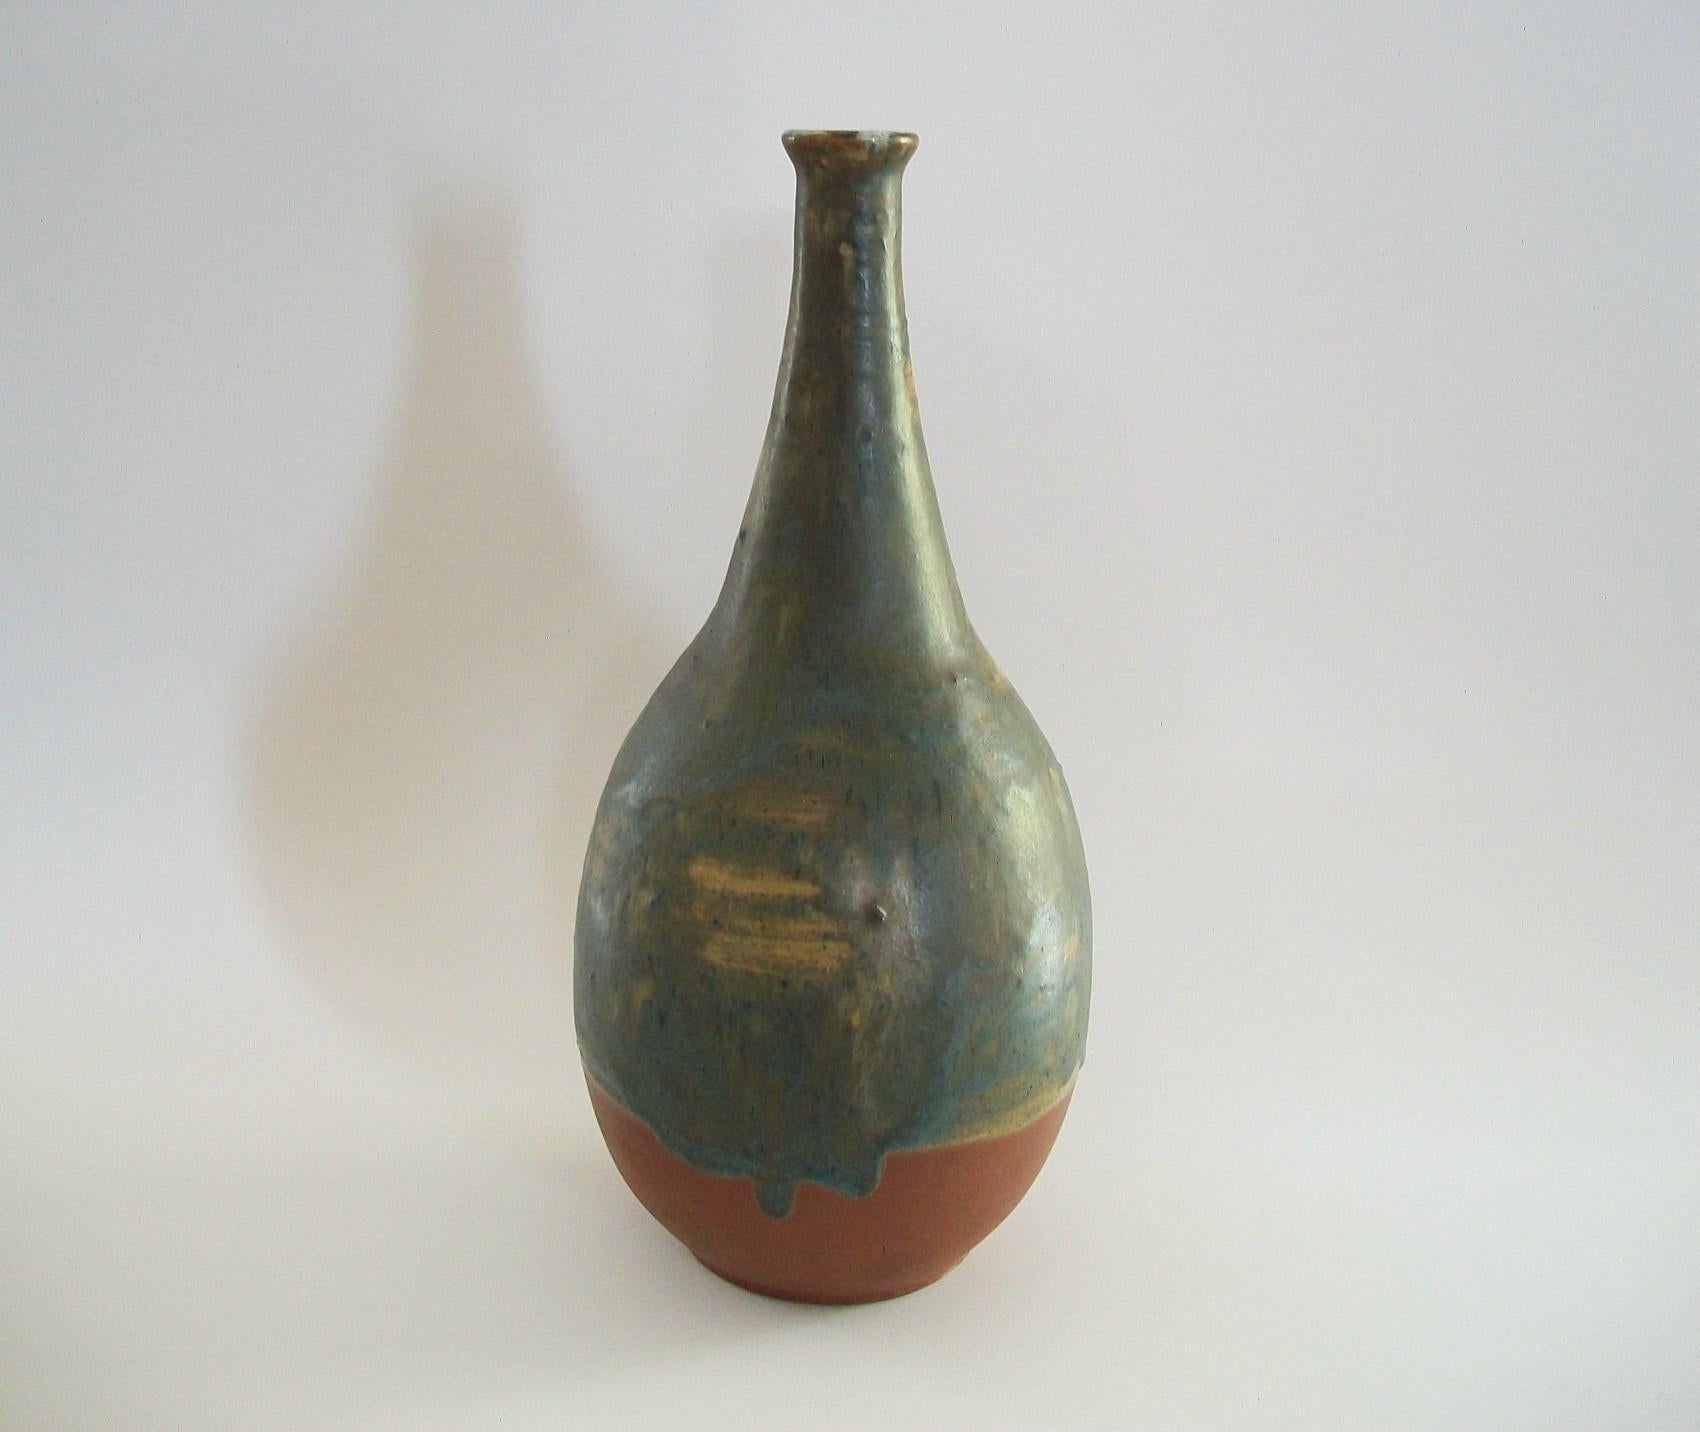 Treimane Art Pottery - Midcentury Studio Pottery Vase - Canada - circa 1960s In Good Condition For Sale In Chatham, ON